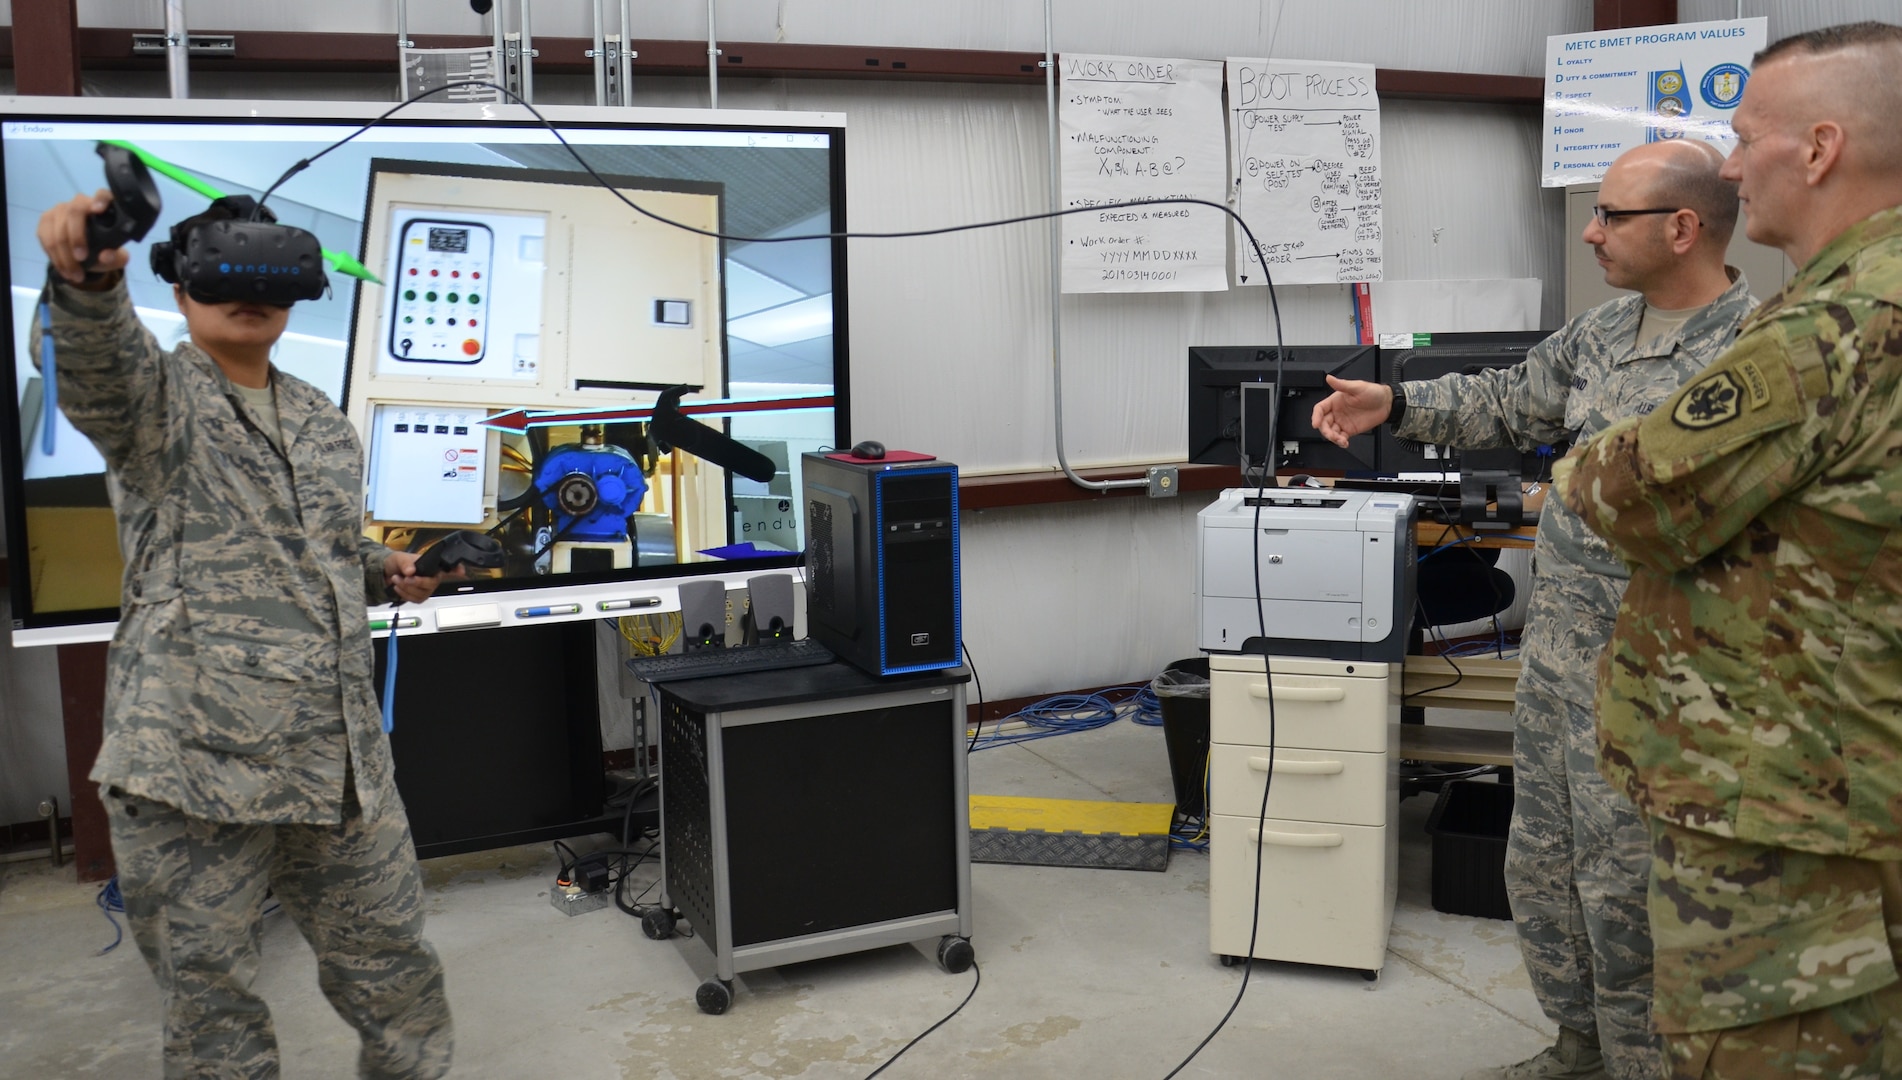 Command Sgt. Major John Wayne Troxell, senior enlisted advisor to the Chairman of the Joint Chiefs of Staff and the senior non-commissioned officer in the U.S. Armed Forces, observes as Staff Sgt. Jemima Alvarez, an instructor in the Biomedical Equipment Technician program, demonstrates a virtual interactive classroom modality that the program is testing as a training tool for repairing Expeditionary Deployable Oxygen Concentration System units while BMET instructor Master Sgt. Christian Bond explains how it works.